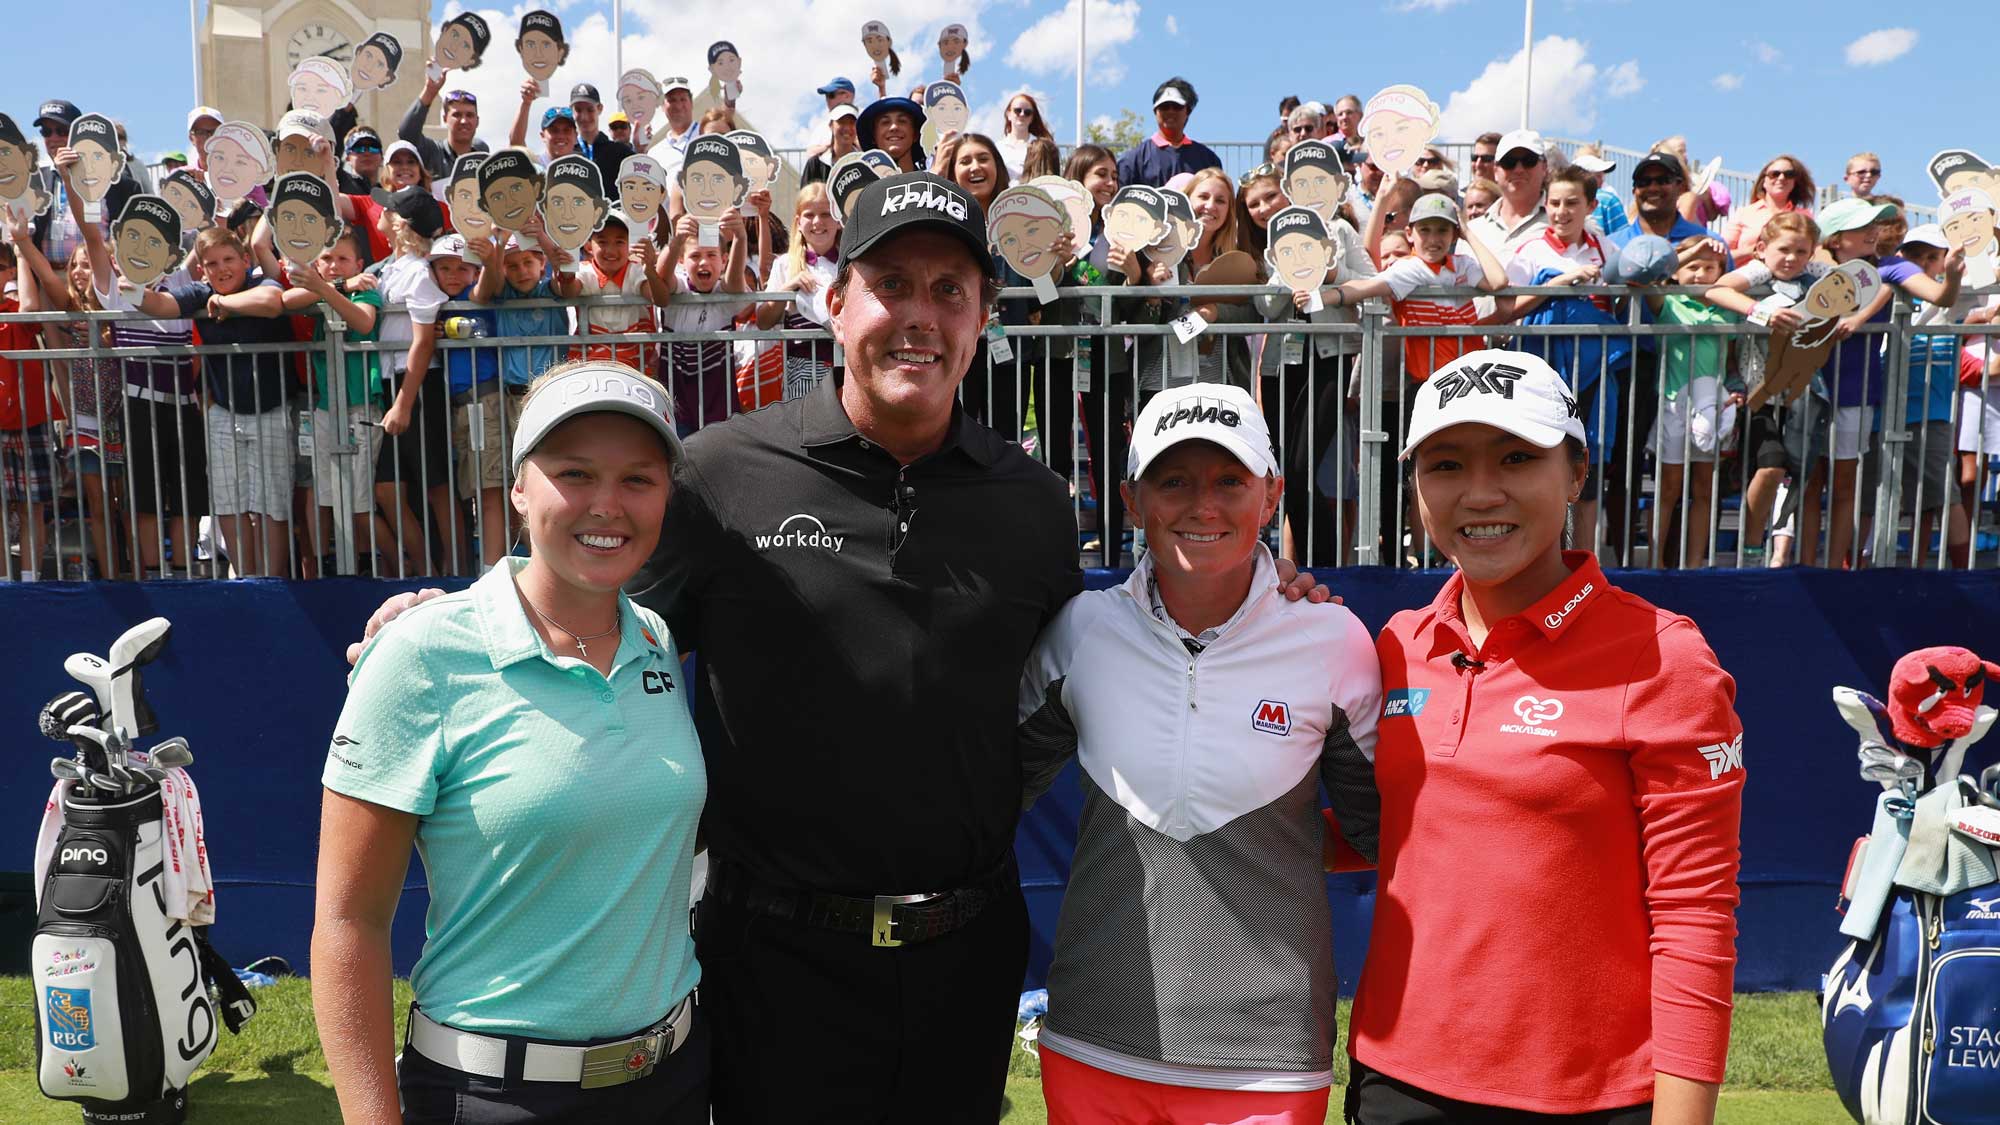 (L-R) Brooke Henderson, Phil Mickelson, Stacy Lewis and Lydia Ko pose together during a skills challenge prior to the start of the 2017 KPMG Women's PGA Championship